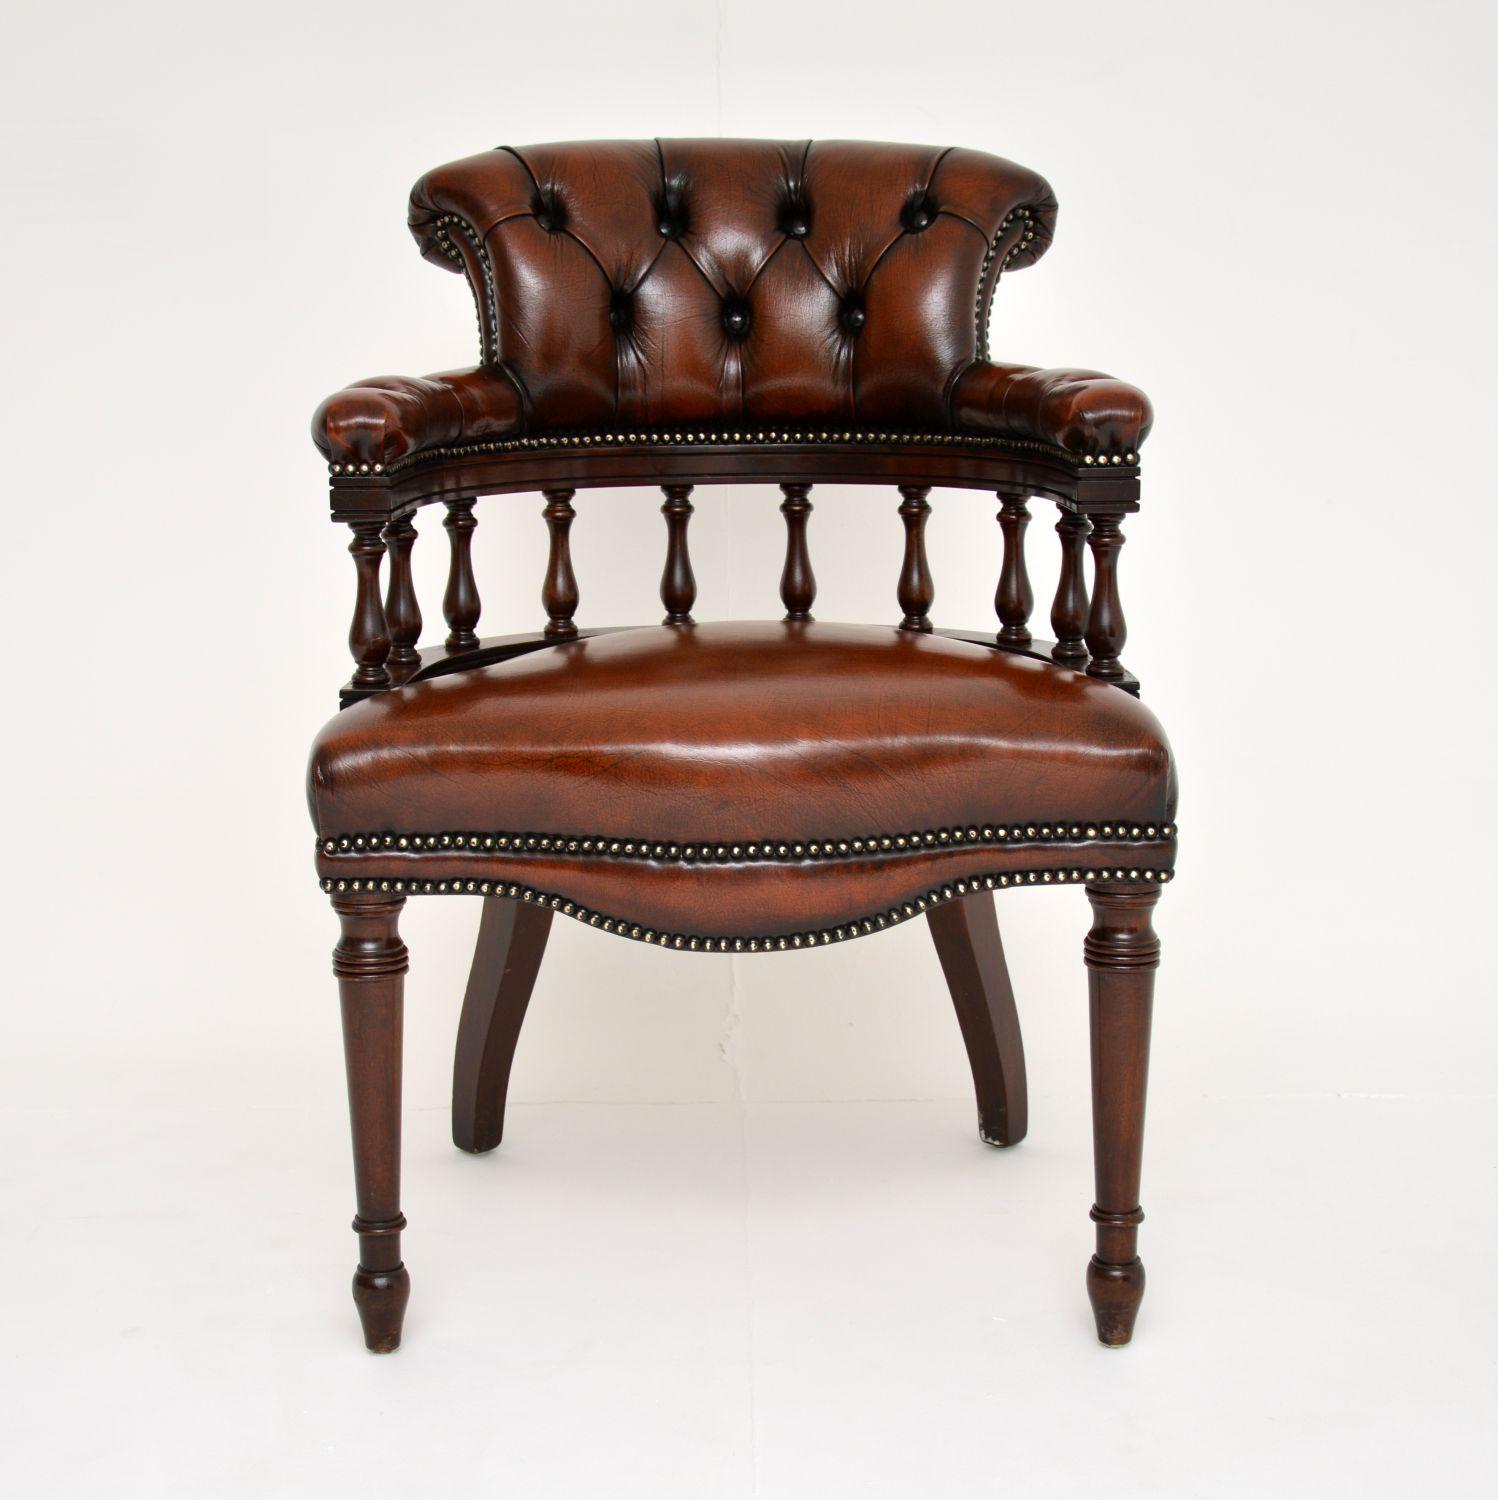 A smart and very comfortable antique captains desk chair in leather. This was made in England, it dates from around the 1930’s.

This is of superb quality, it is sturdy, well built and has a beautiful design. It is a great size with a generous